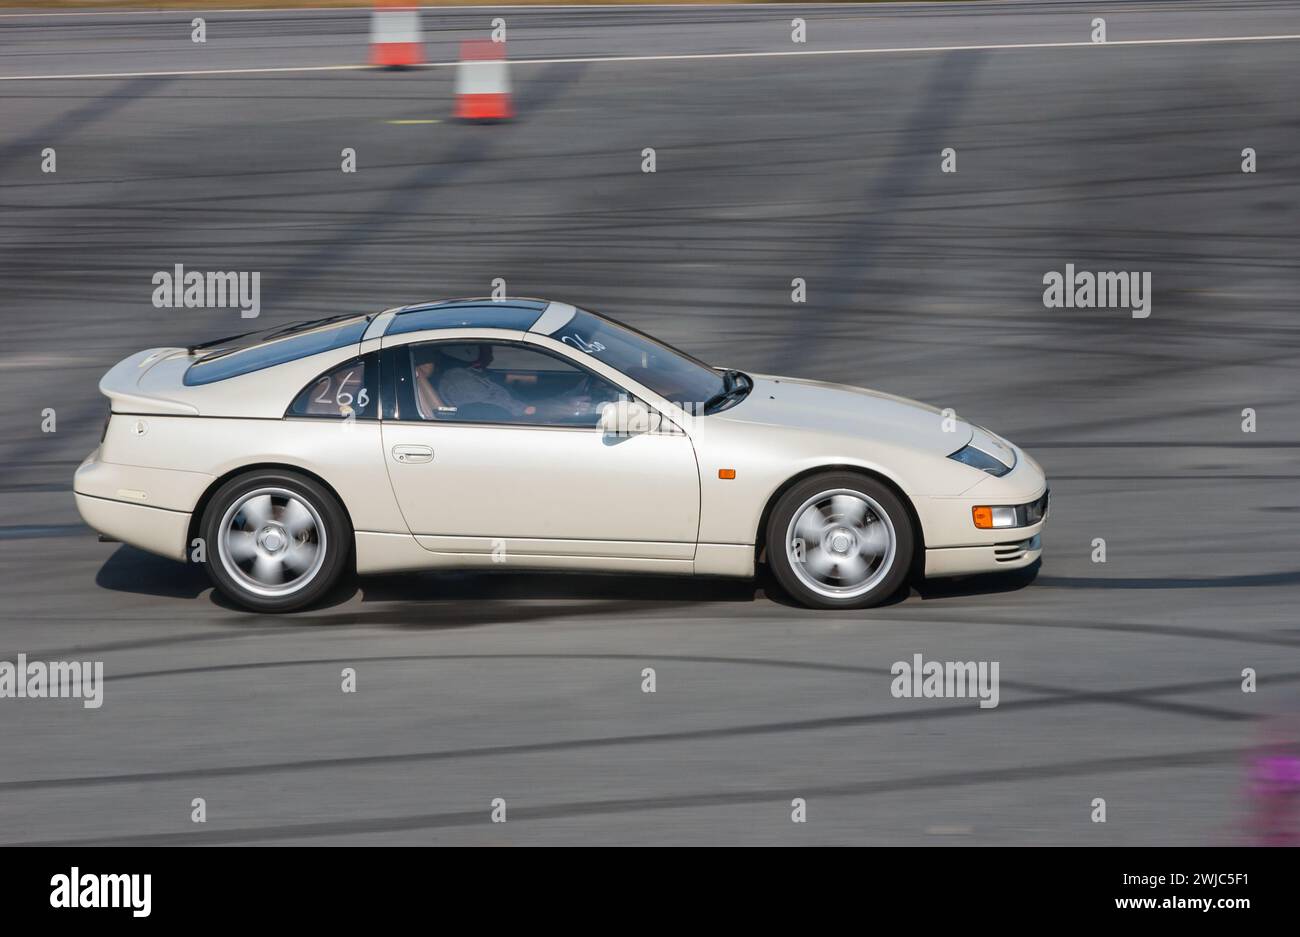 Kristiansand, Norway - August 20 2005: White Nissan 300ZX on a track day. Stock Photo